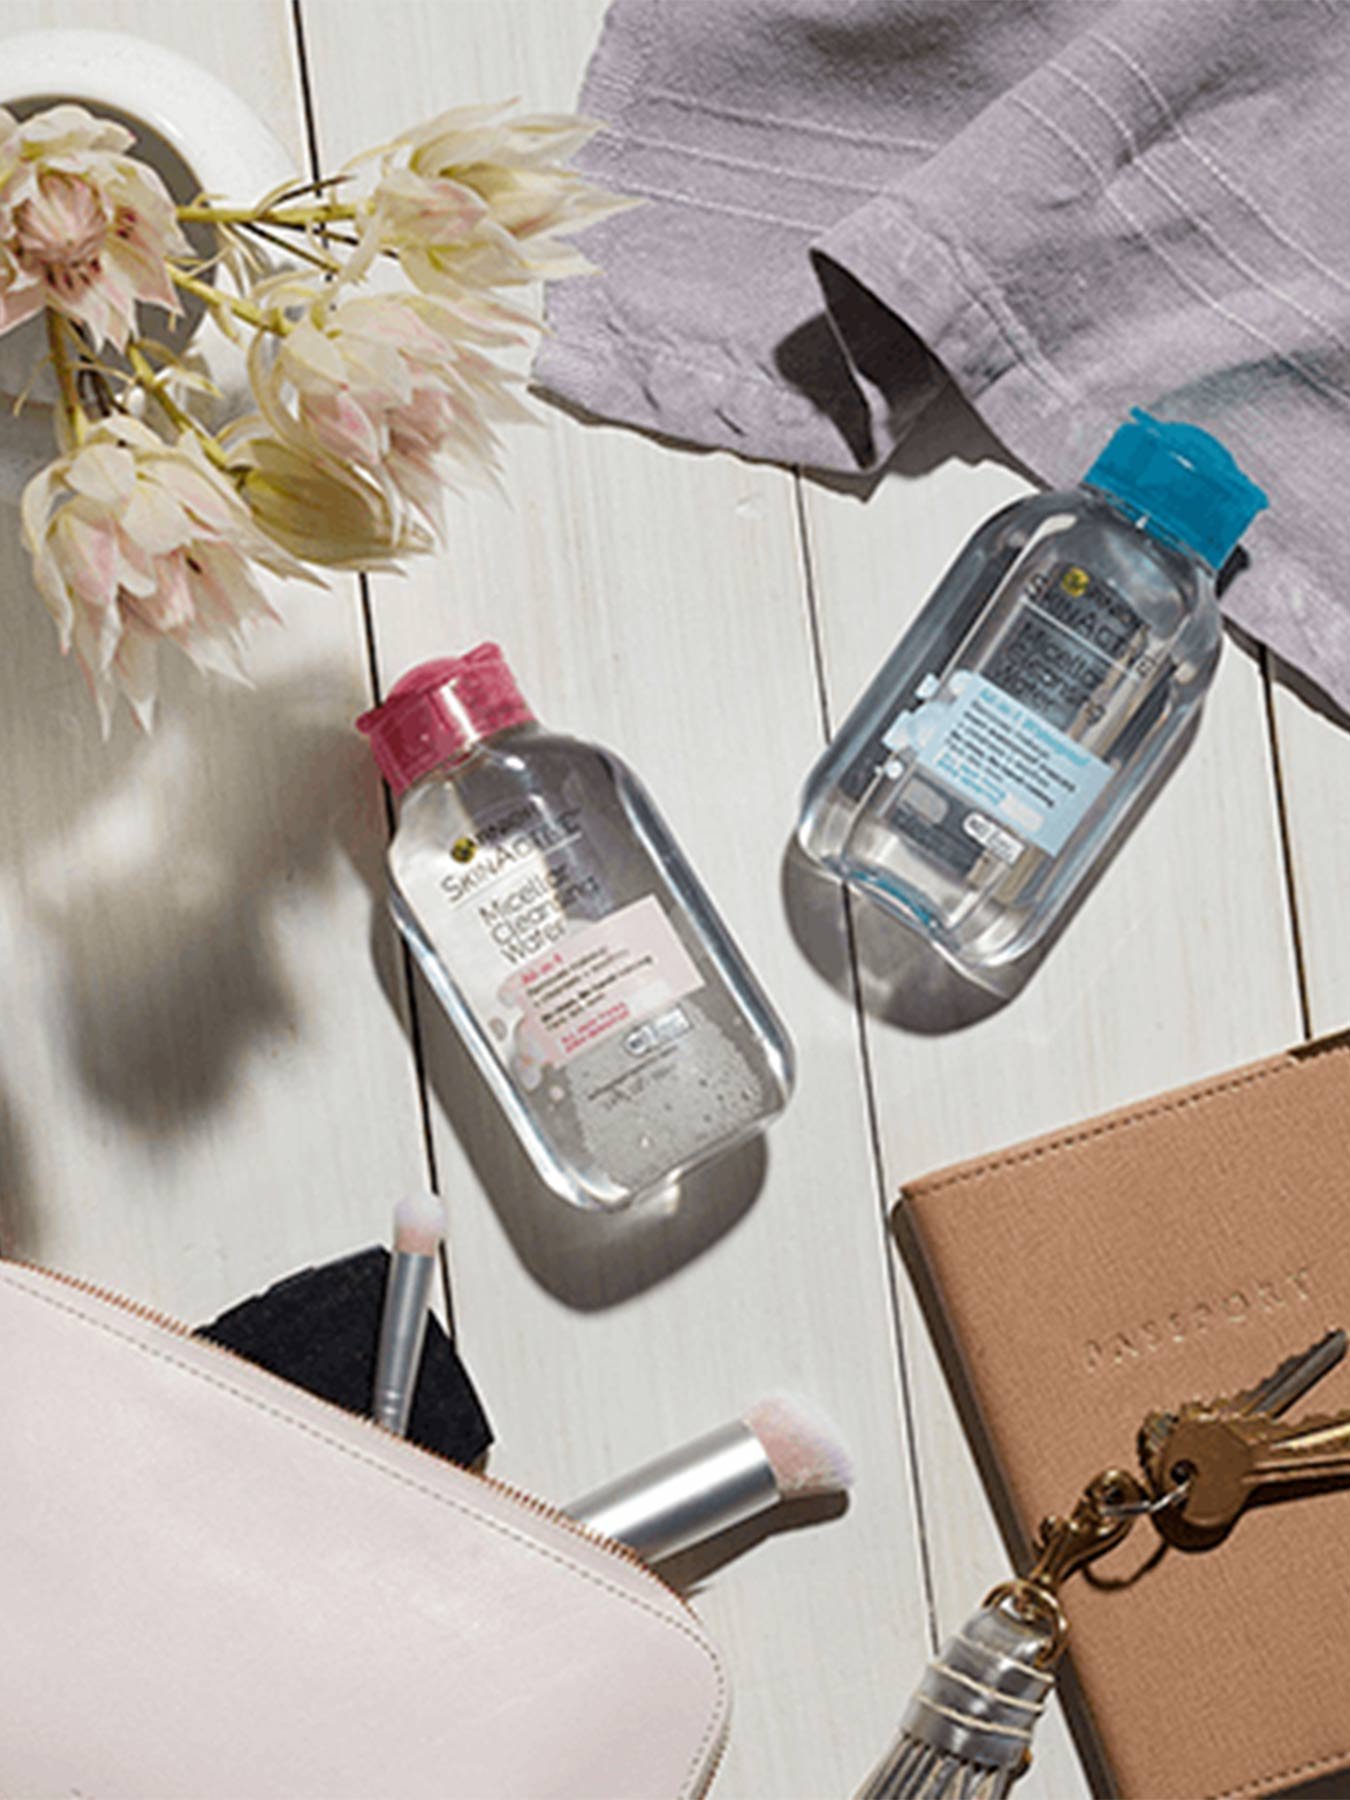 A bottle of Micellar Cleansing Water Travel Size and Micellar Waterproof Cleansing Water Travel Size on a white wooden background an open pink makeup bag with makeup brushes sticking out, keys with a gray fob resting on a brown journal, a lavender towel, and a white vase filled with light pink flowers.